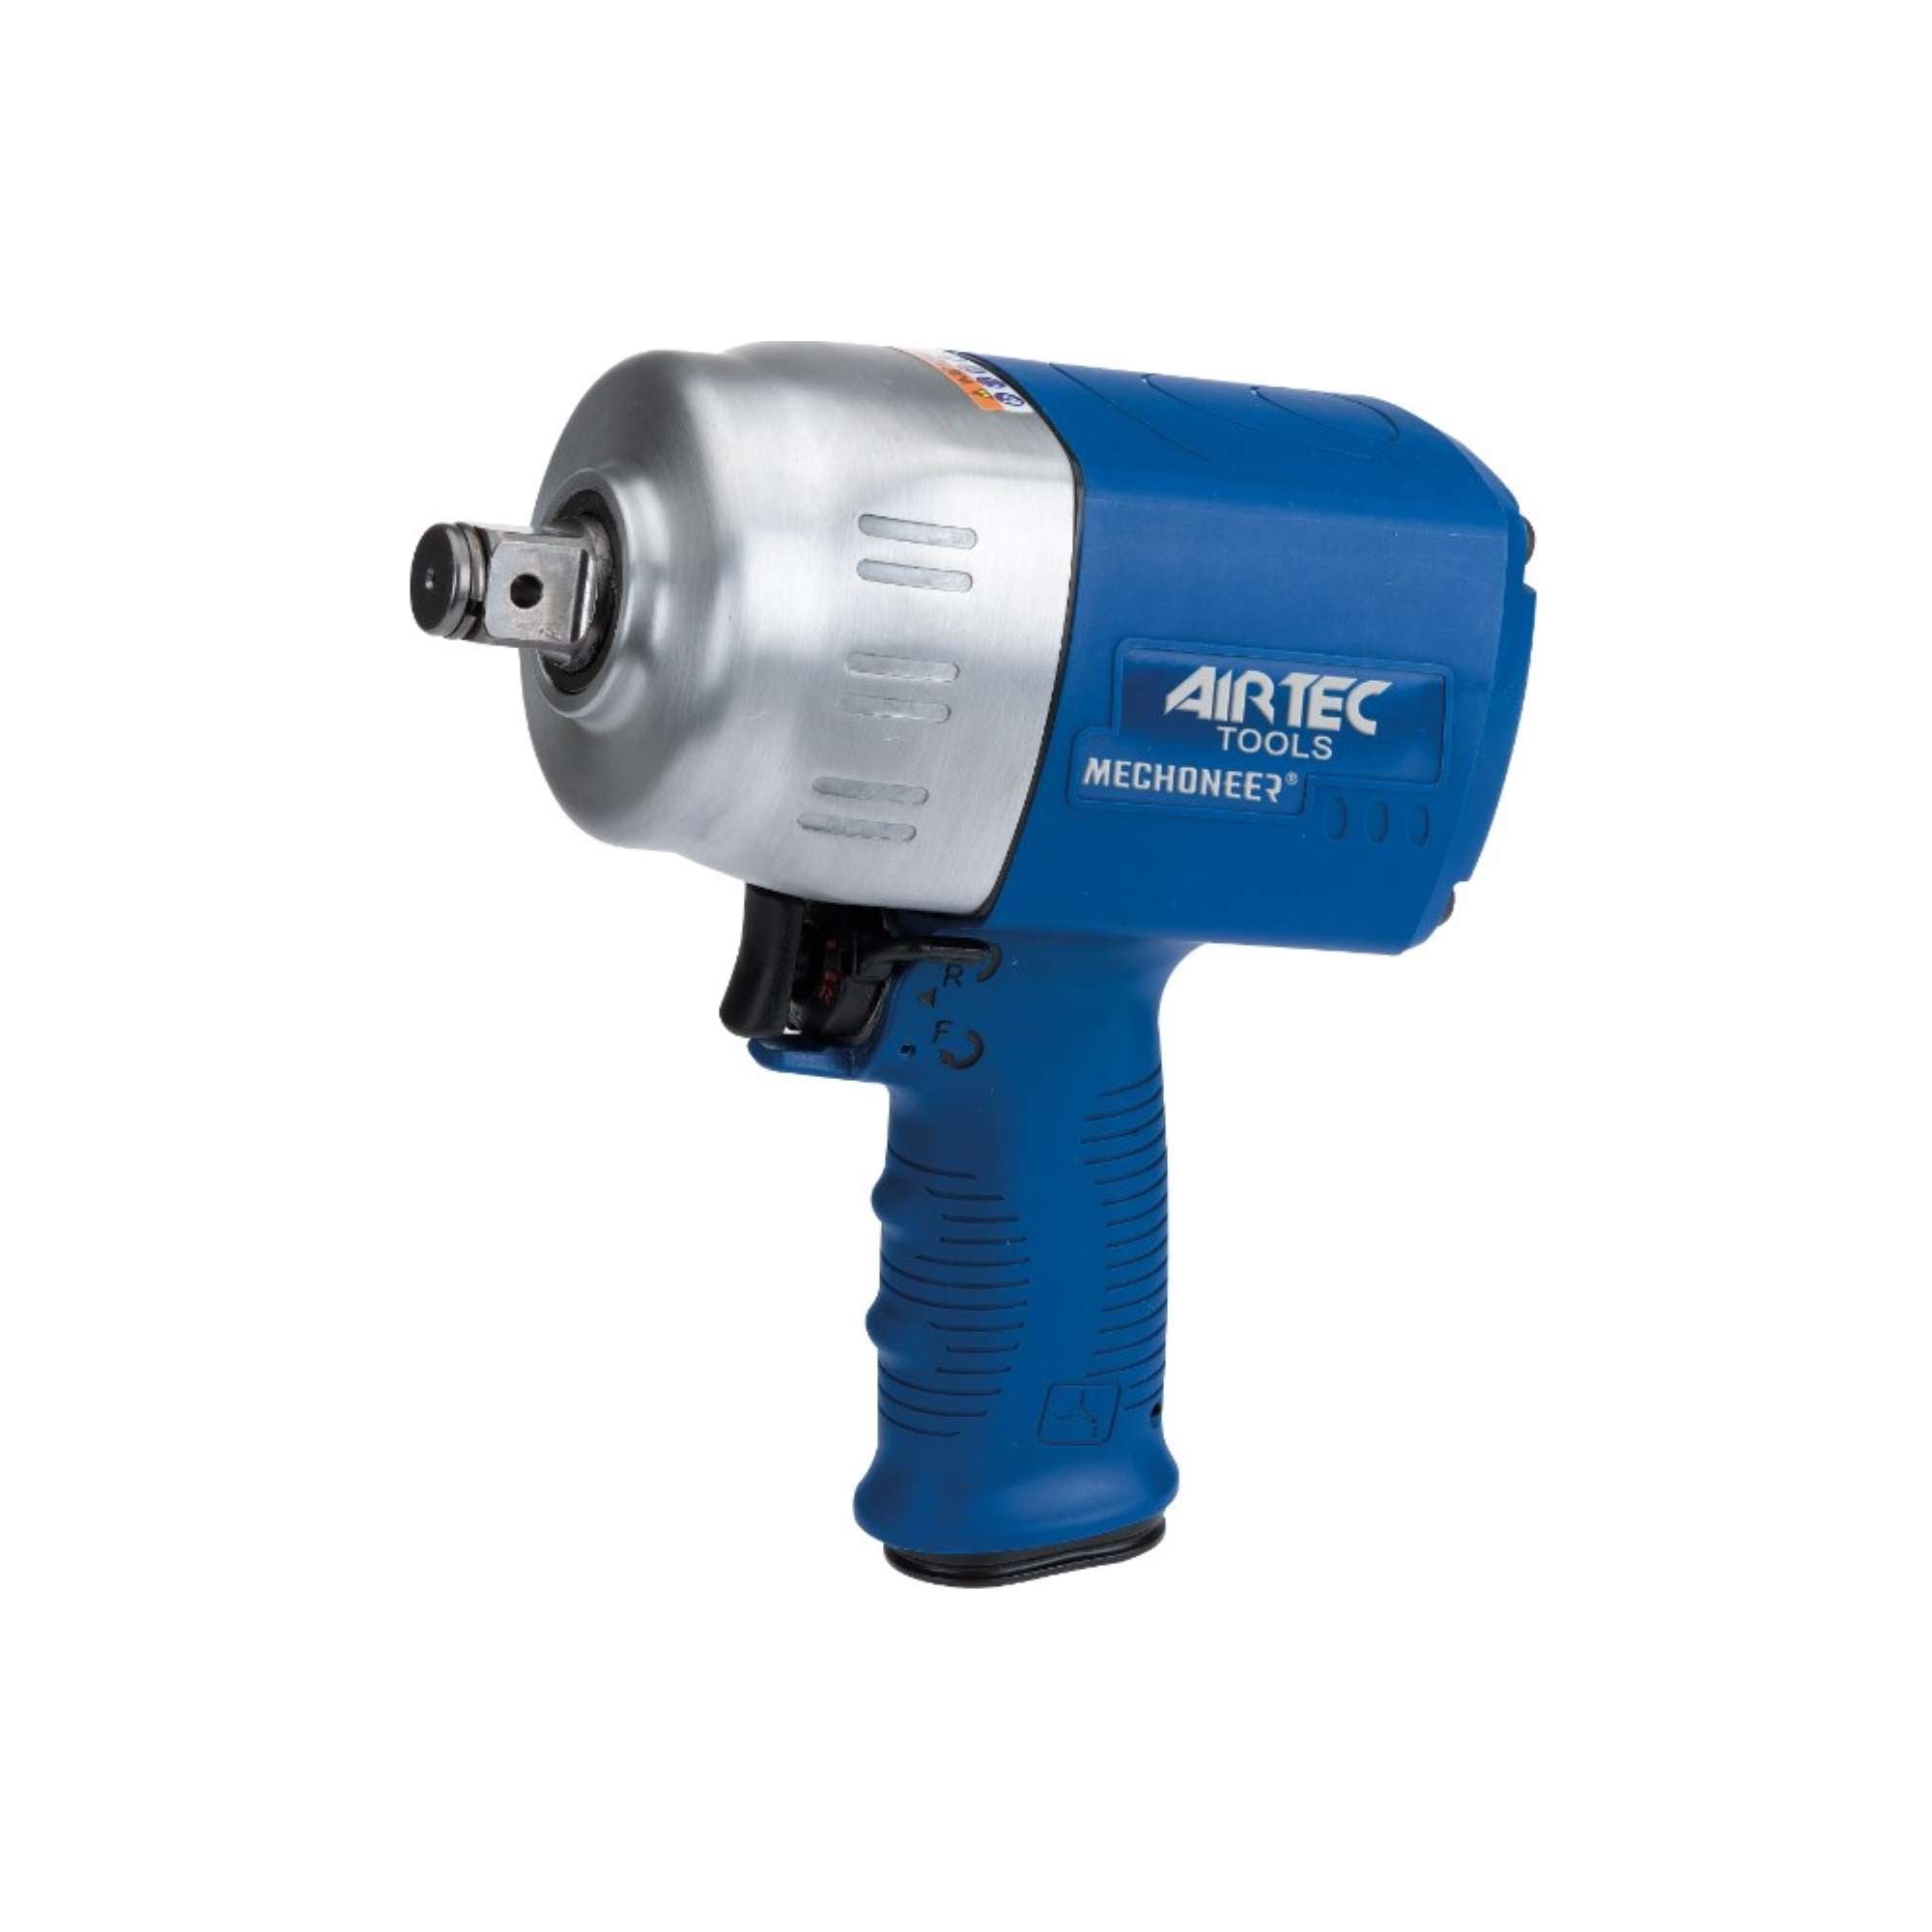 3/4" impact wrench with Mechoneer system - AirTec 357